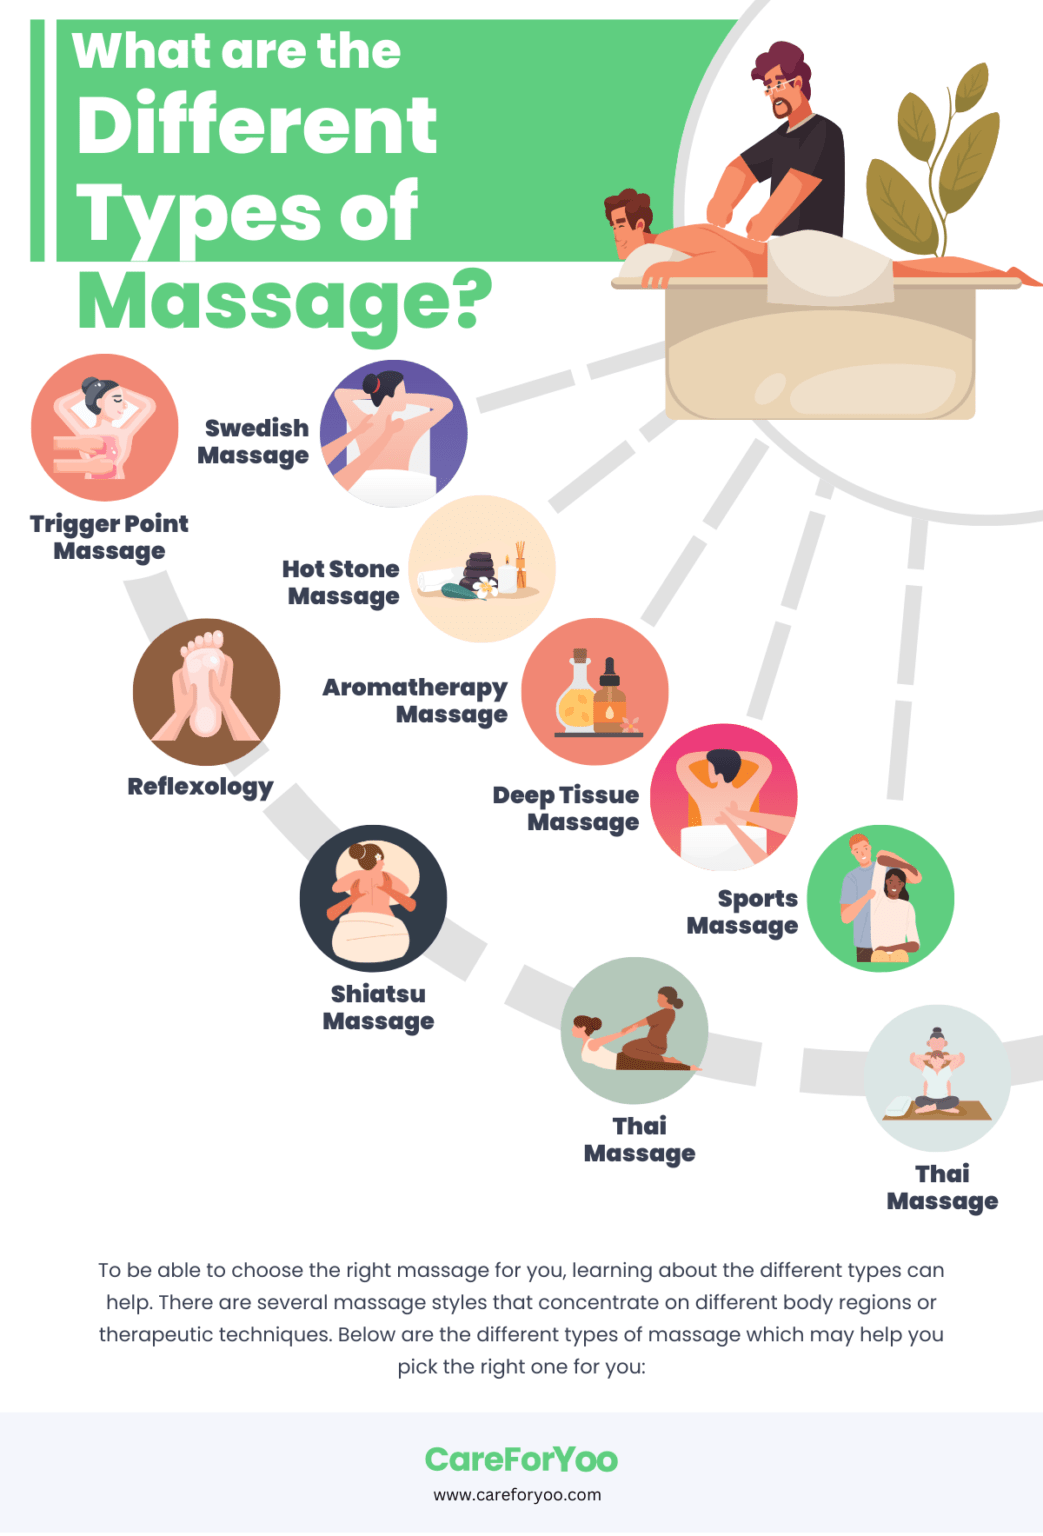 An overview of different types of massage techniques